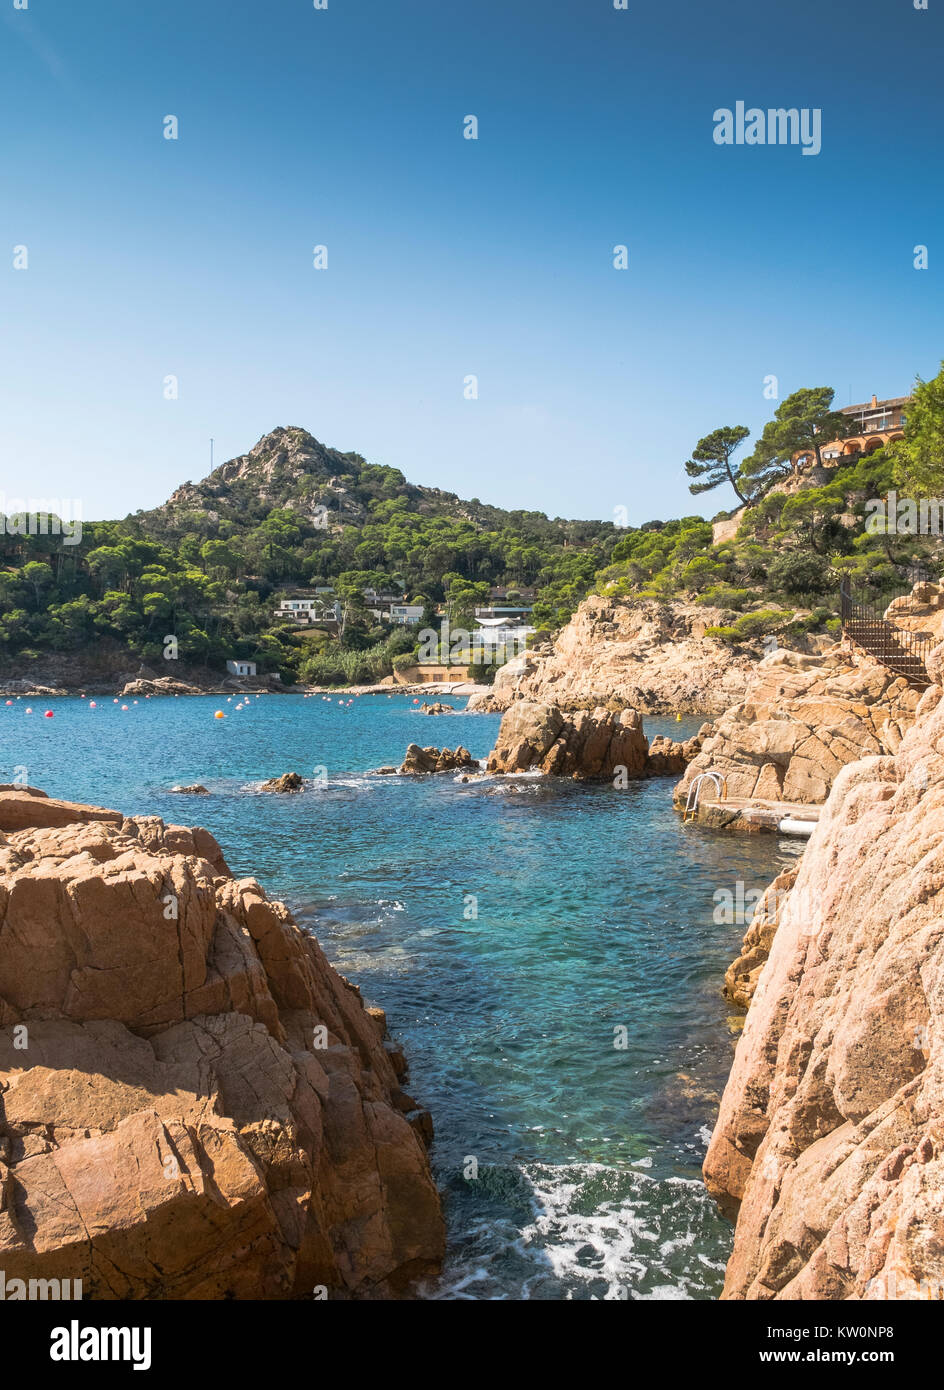 View of part of the rugged coast of the Costa Brava, at Aigua Blava, in Spain Stock Photo